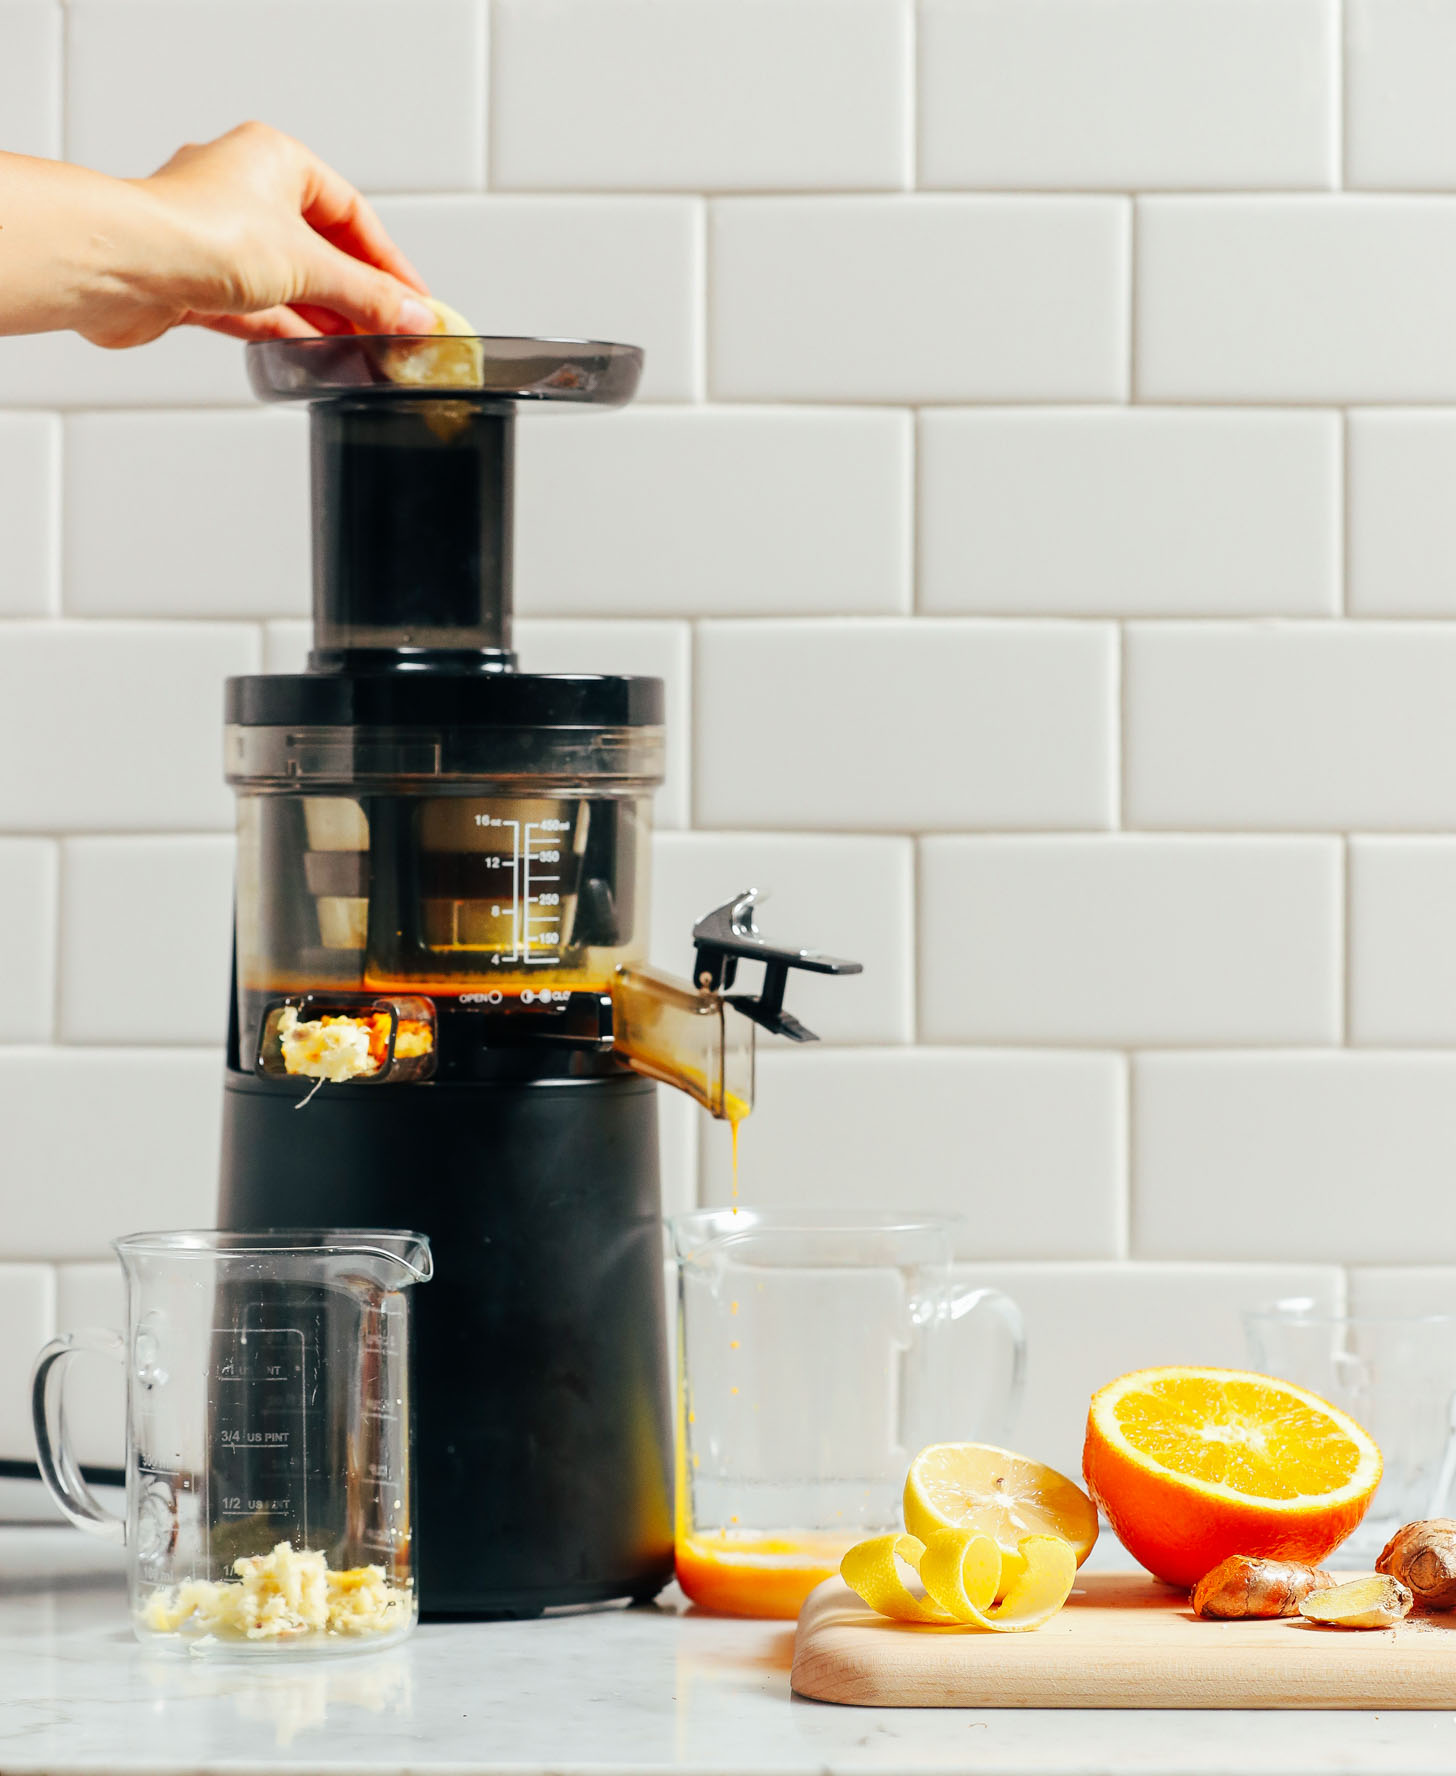 Showing how to use a juicer to make Turmeric Wellness Shots